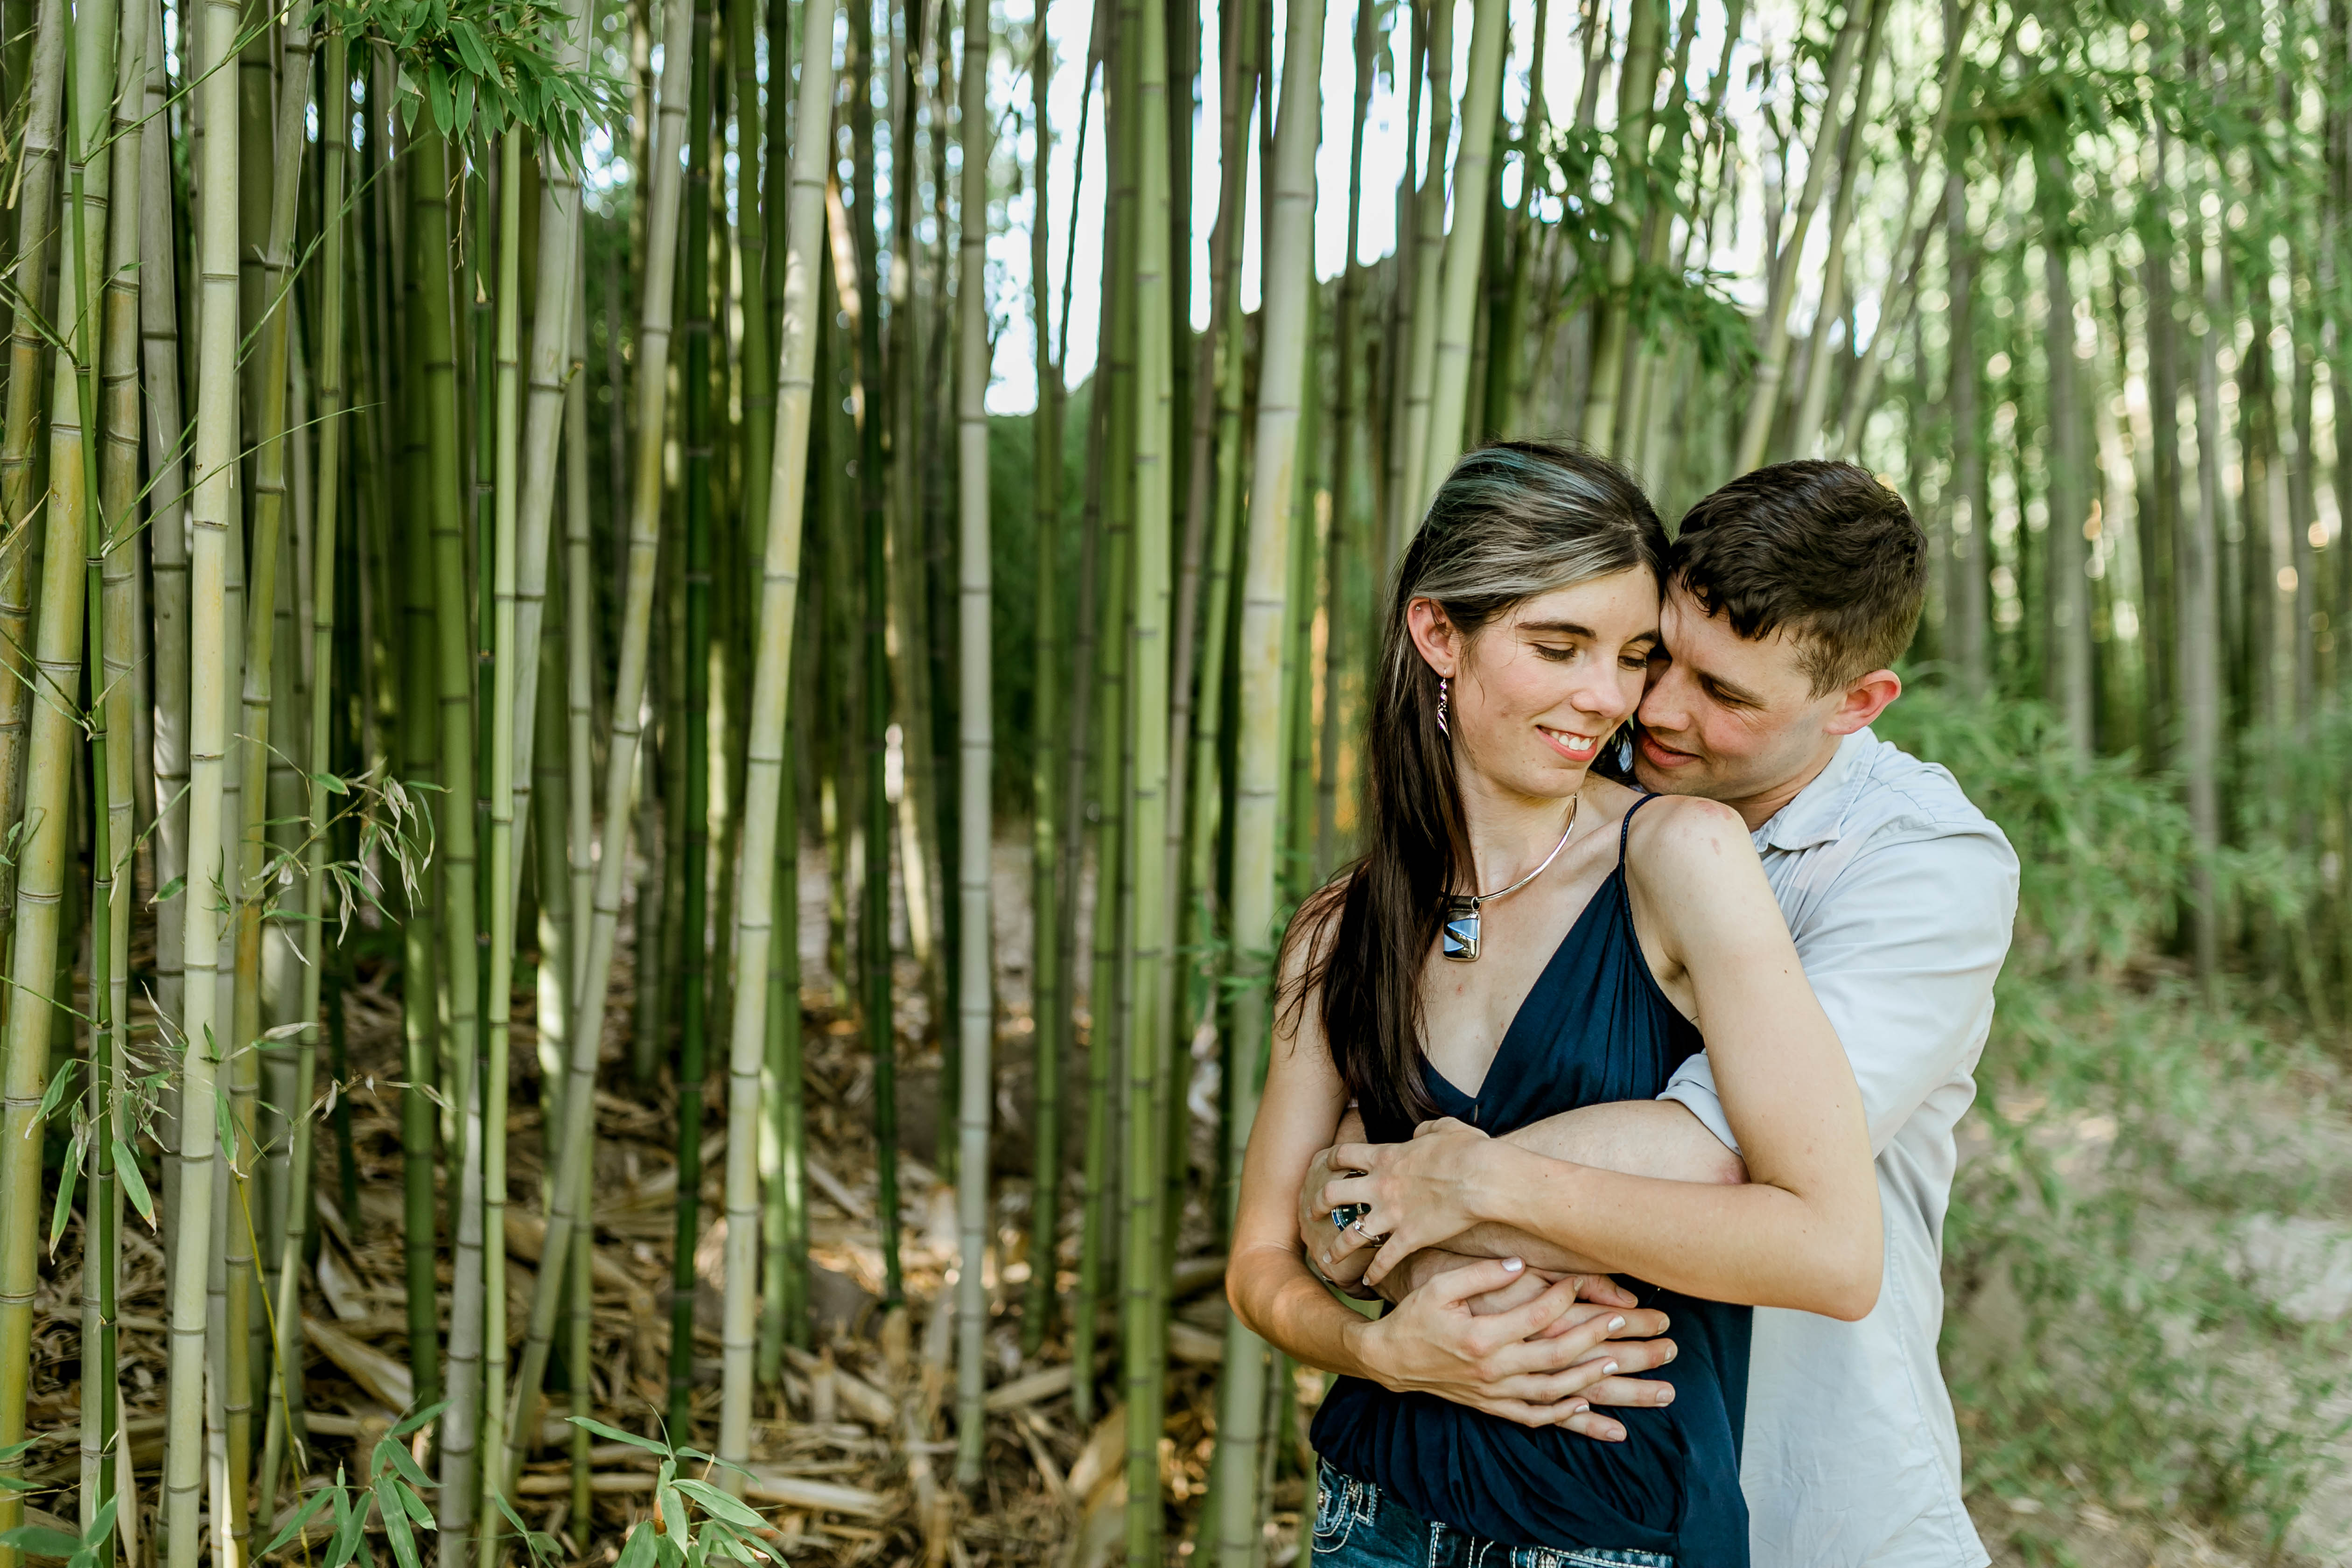 fort worth japanese gardens engagement session, fort worth japanese gardens, japanese gardens fort worth, fort worth engagement session, fort worth engagement photographer, engagement photographers in fort worth, wedding photographers in fort worth, fort worth wedding photographer, fort worth tx, couples photographer in dallas fort worth, dallas fort worth couples photographer, dallas fort worth engagement photographer, dallas fort worth engagement photography, 